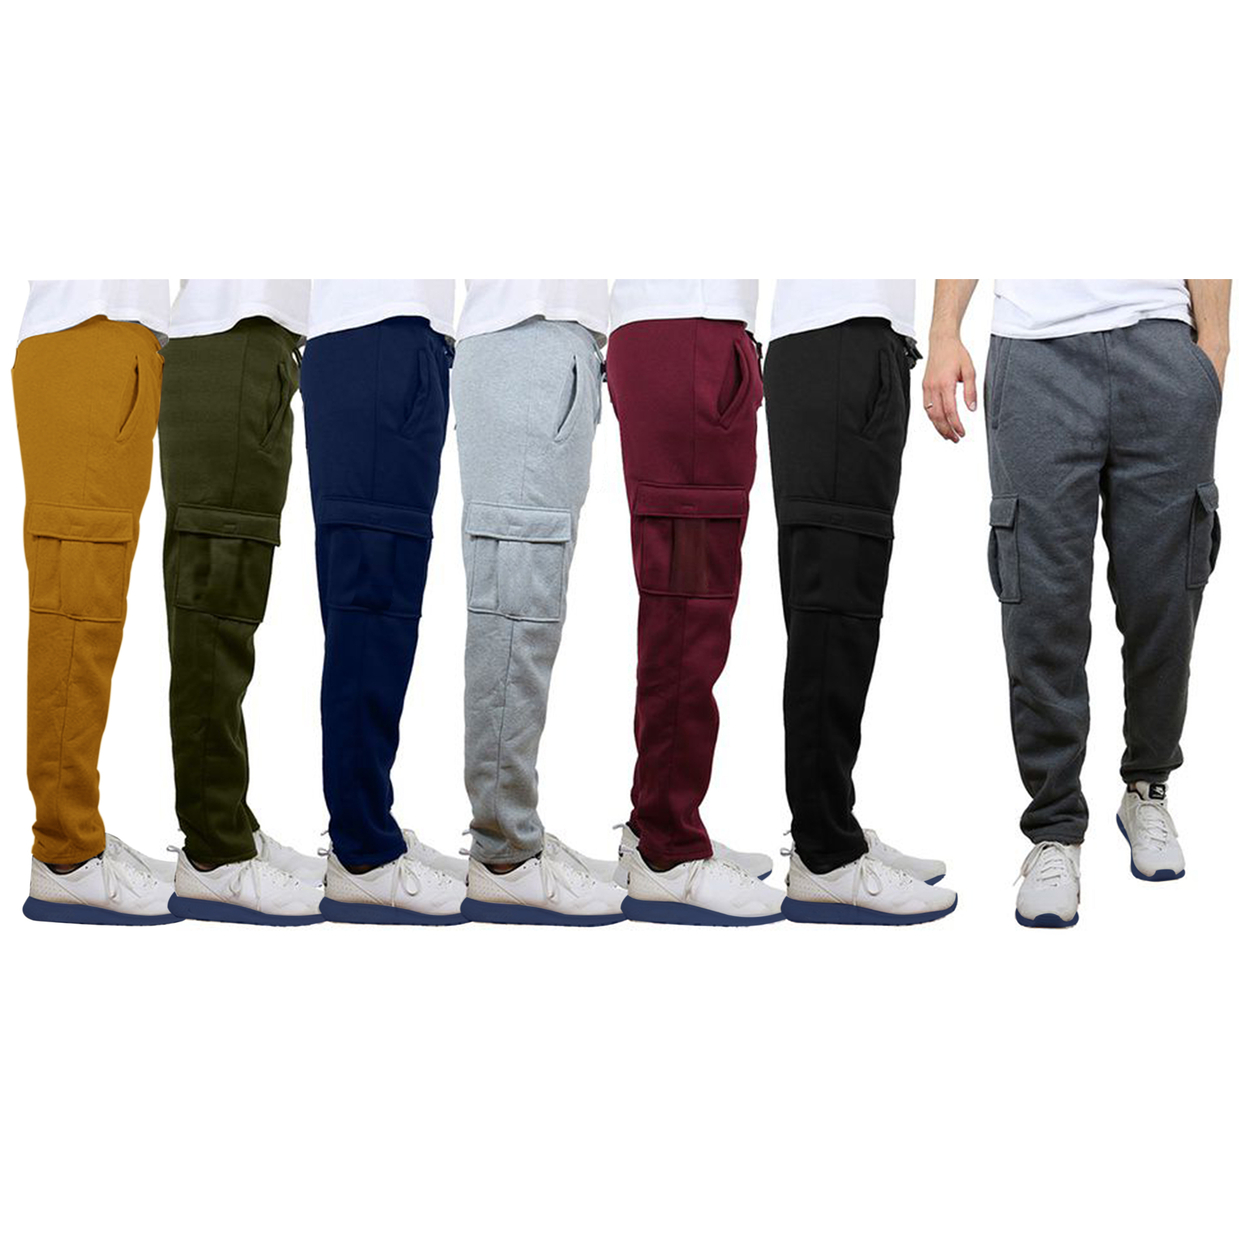 Multipack Men's Casual Solid Cargo Jogger Sweatpants With Pockets - 3, S